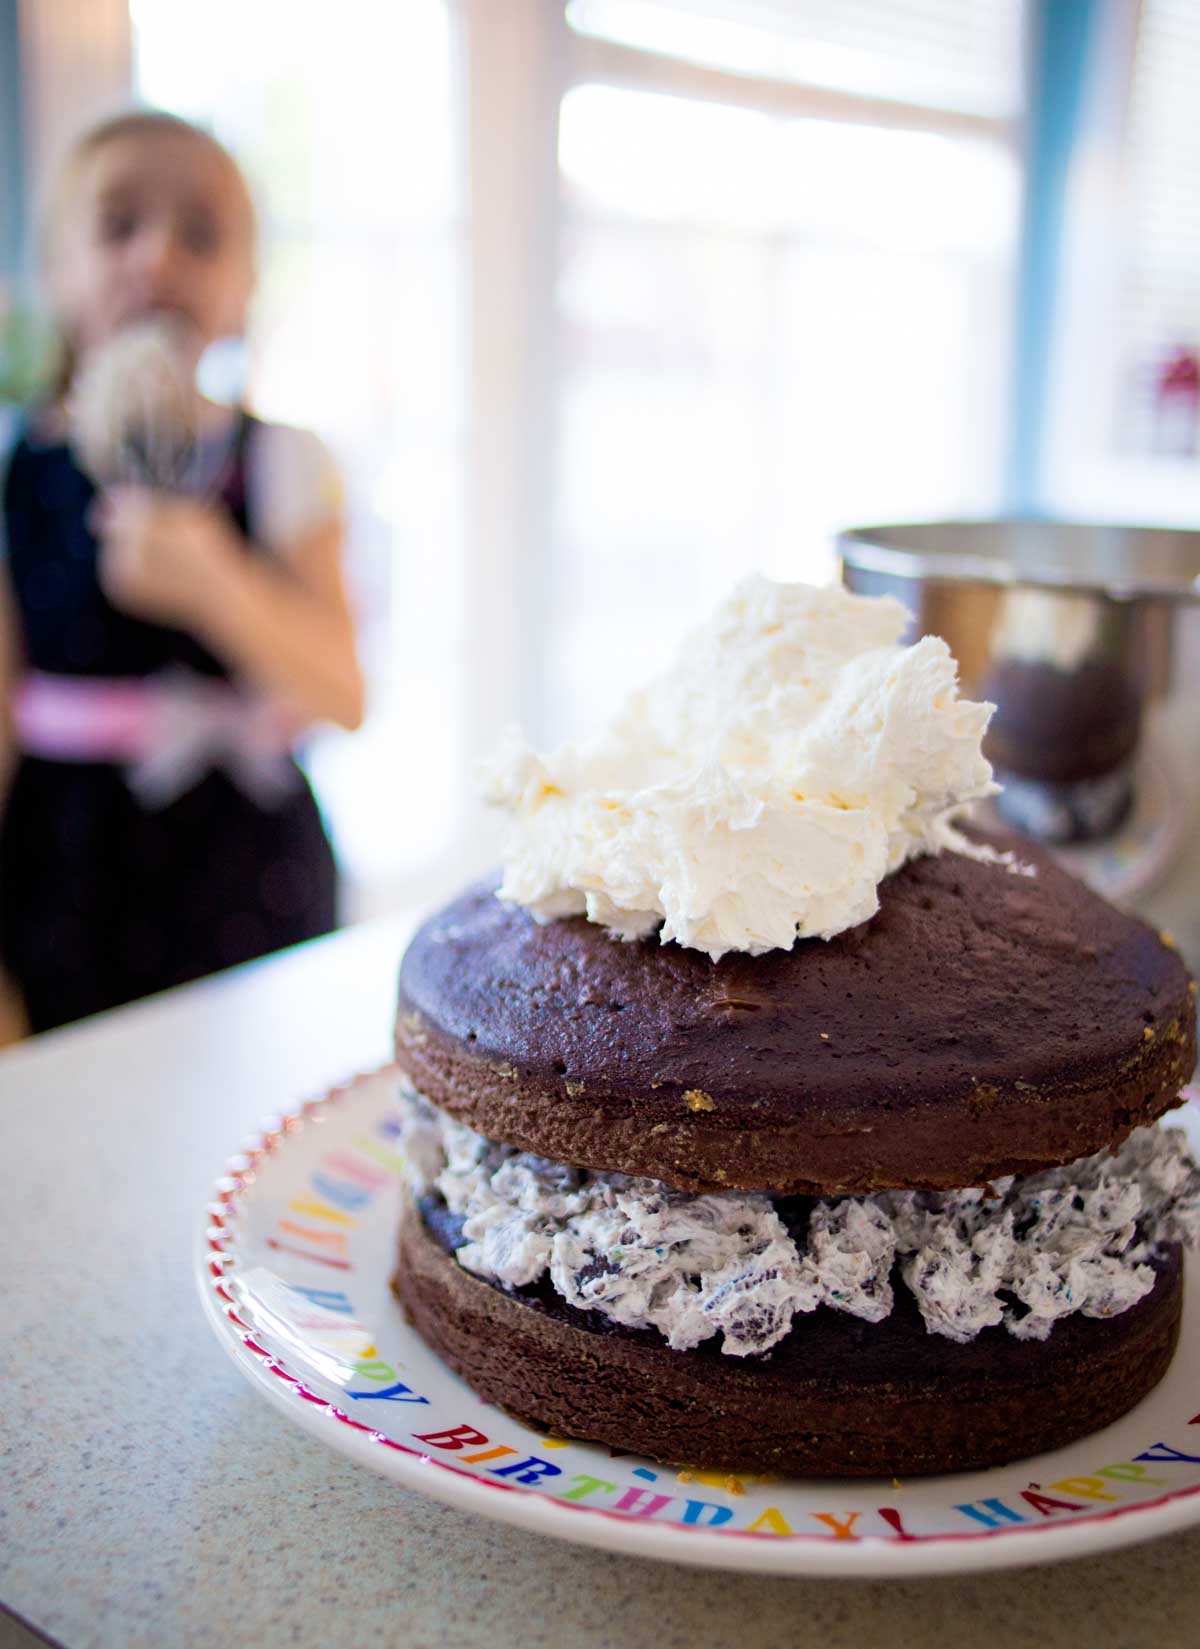 The chocolate cake has been stacked with a dollop of frosting on top about to be spread over it.